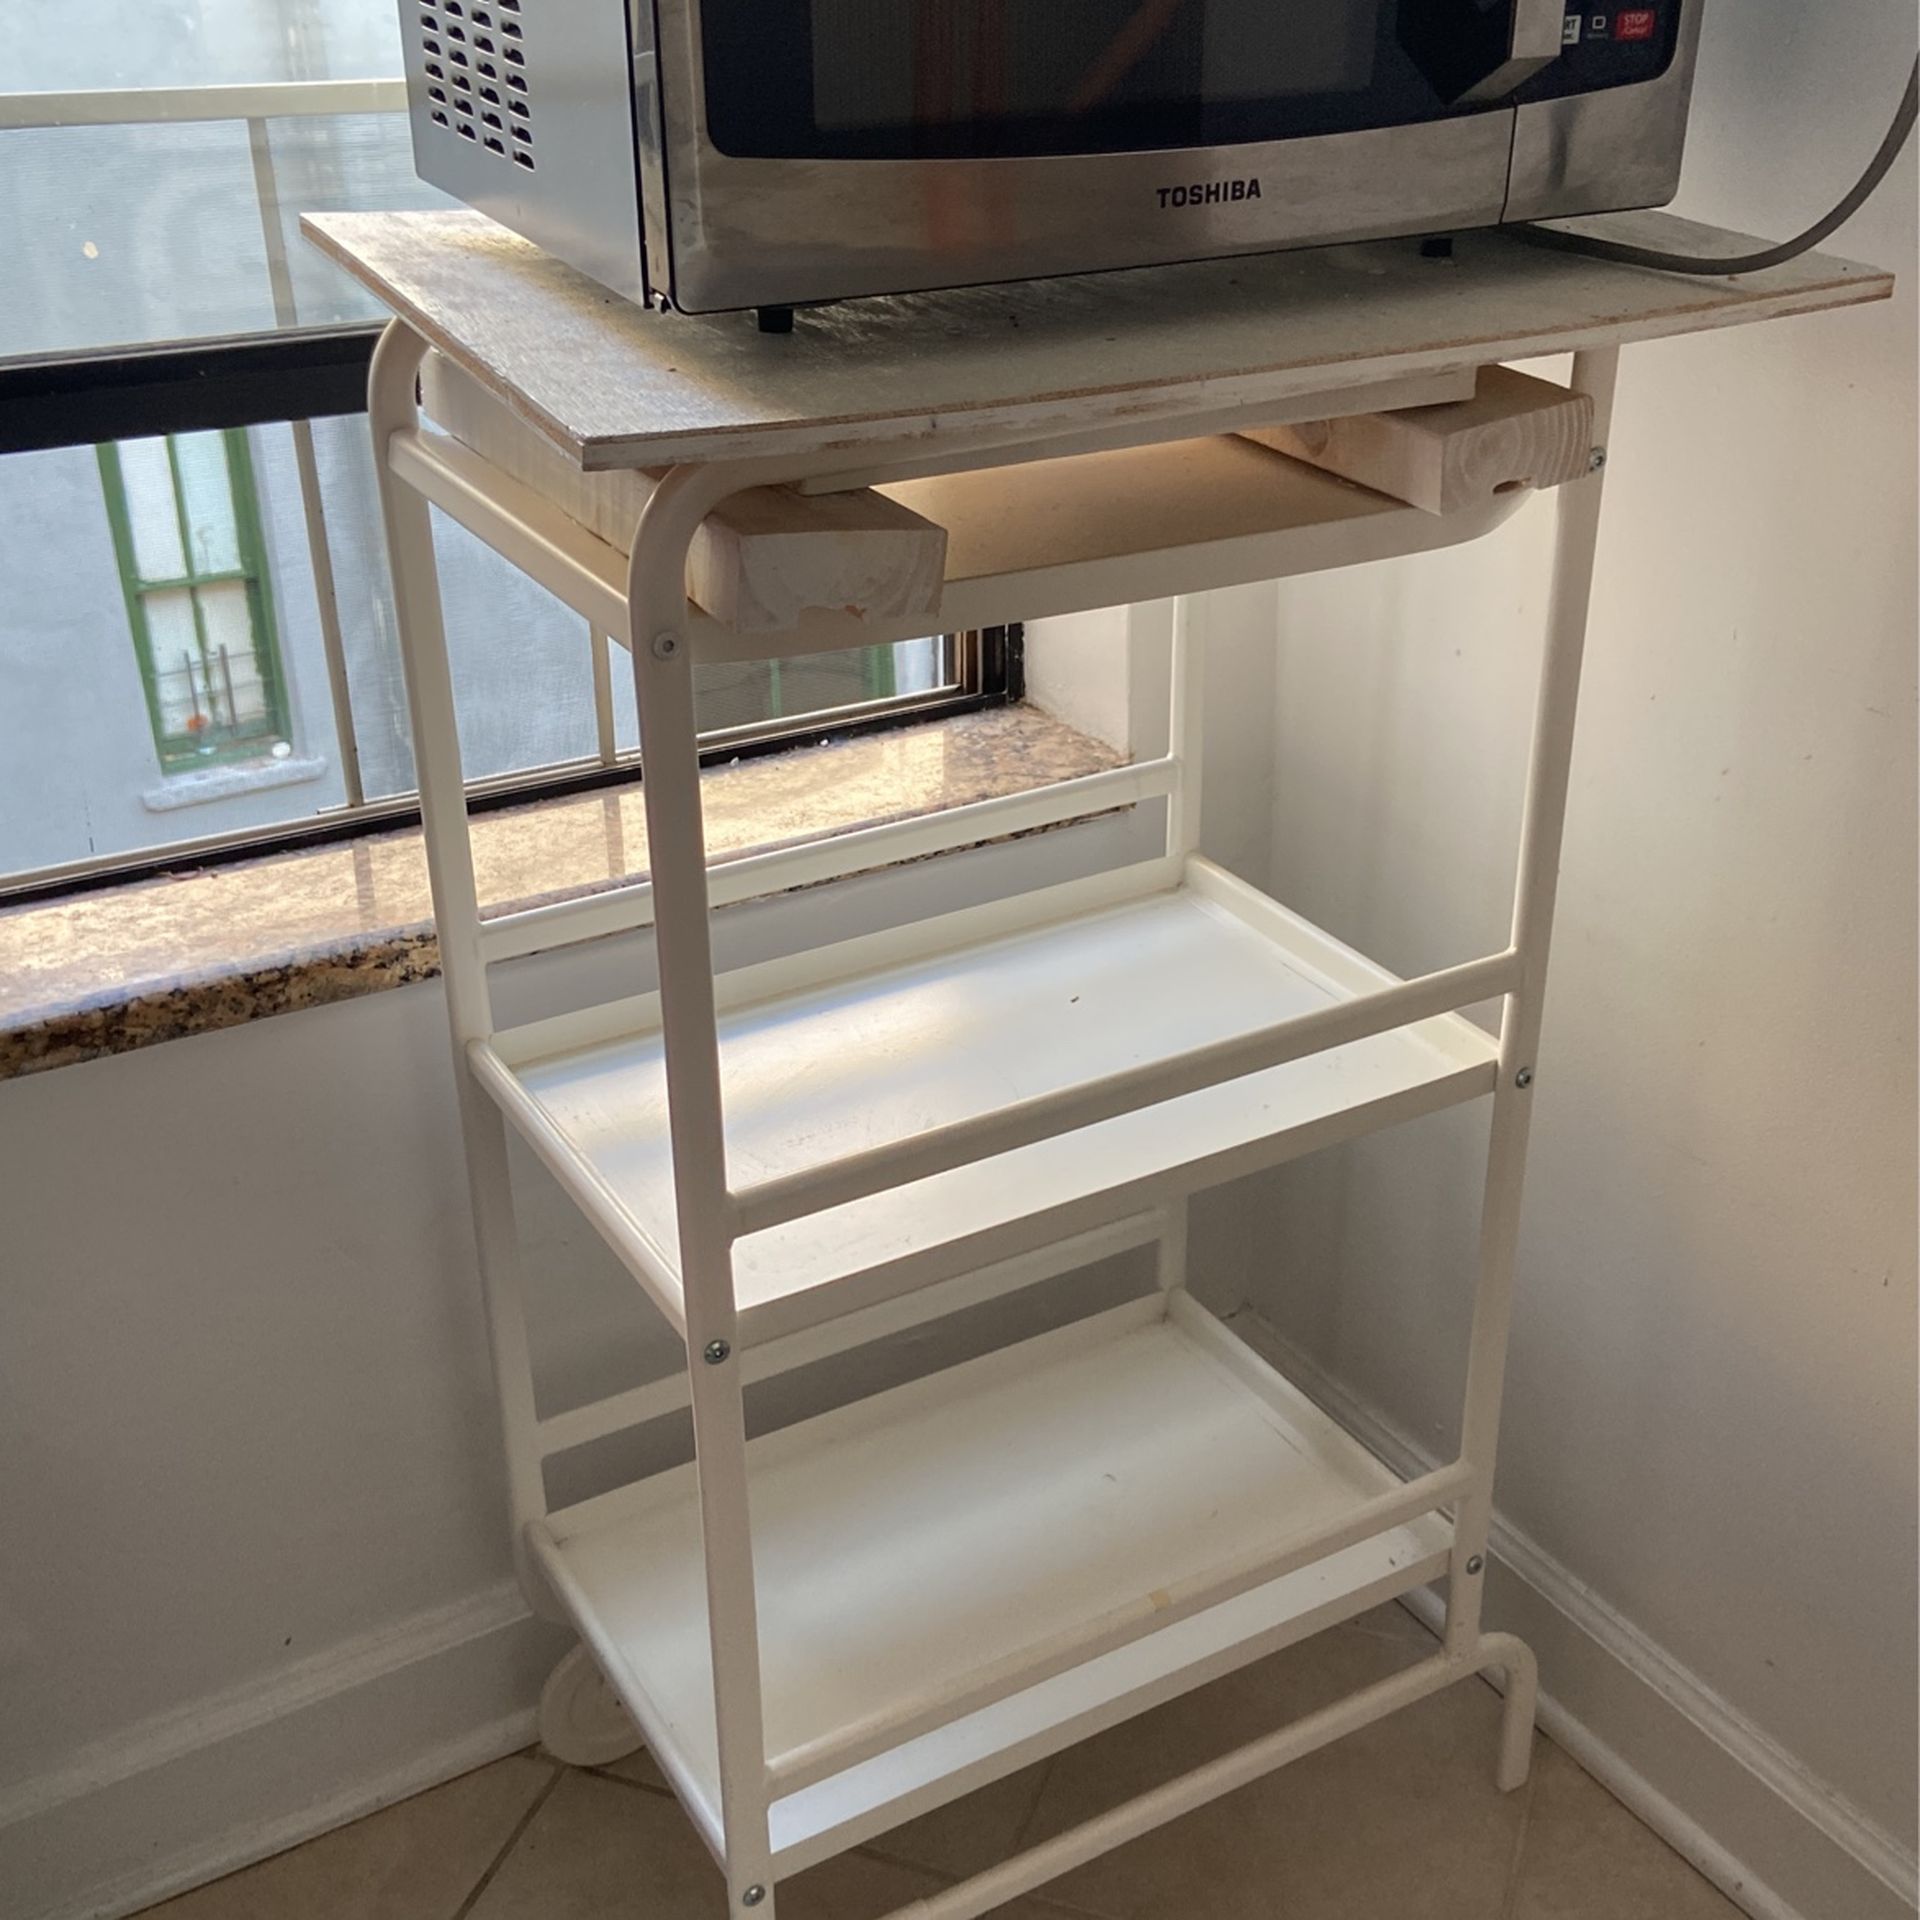 IKEA Microwave Car White $19.99 for Sale in New York, NY - OfferUp